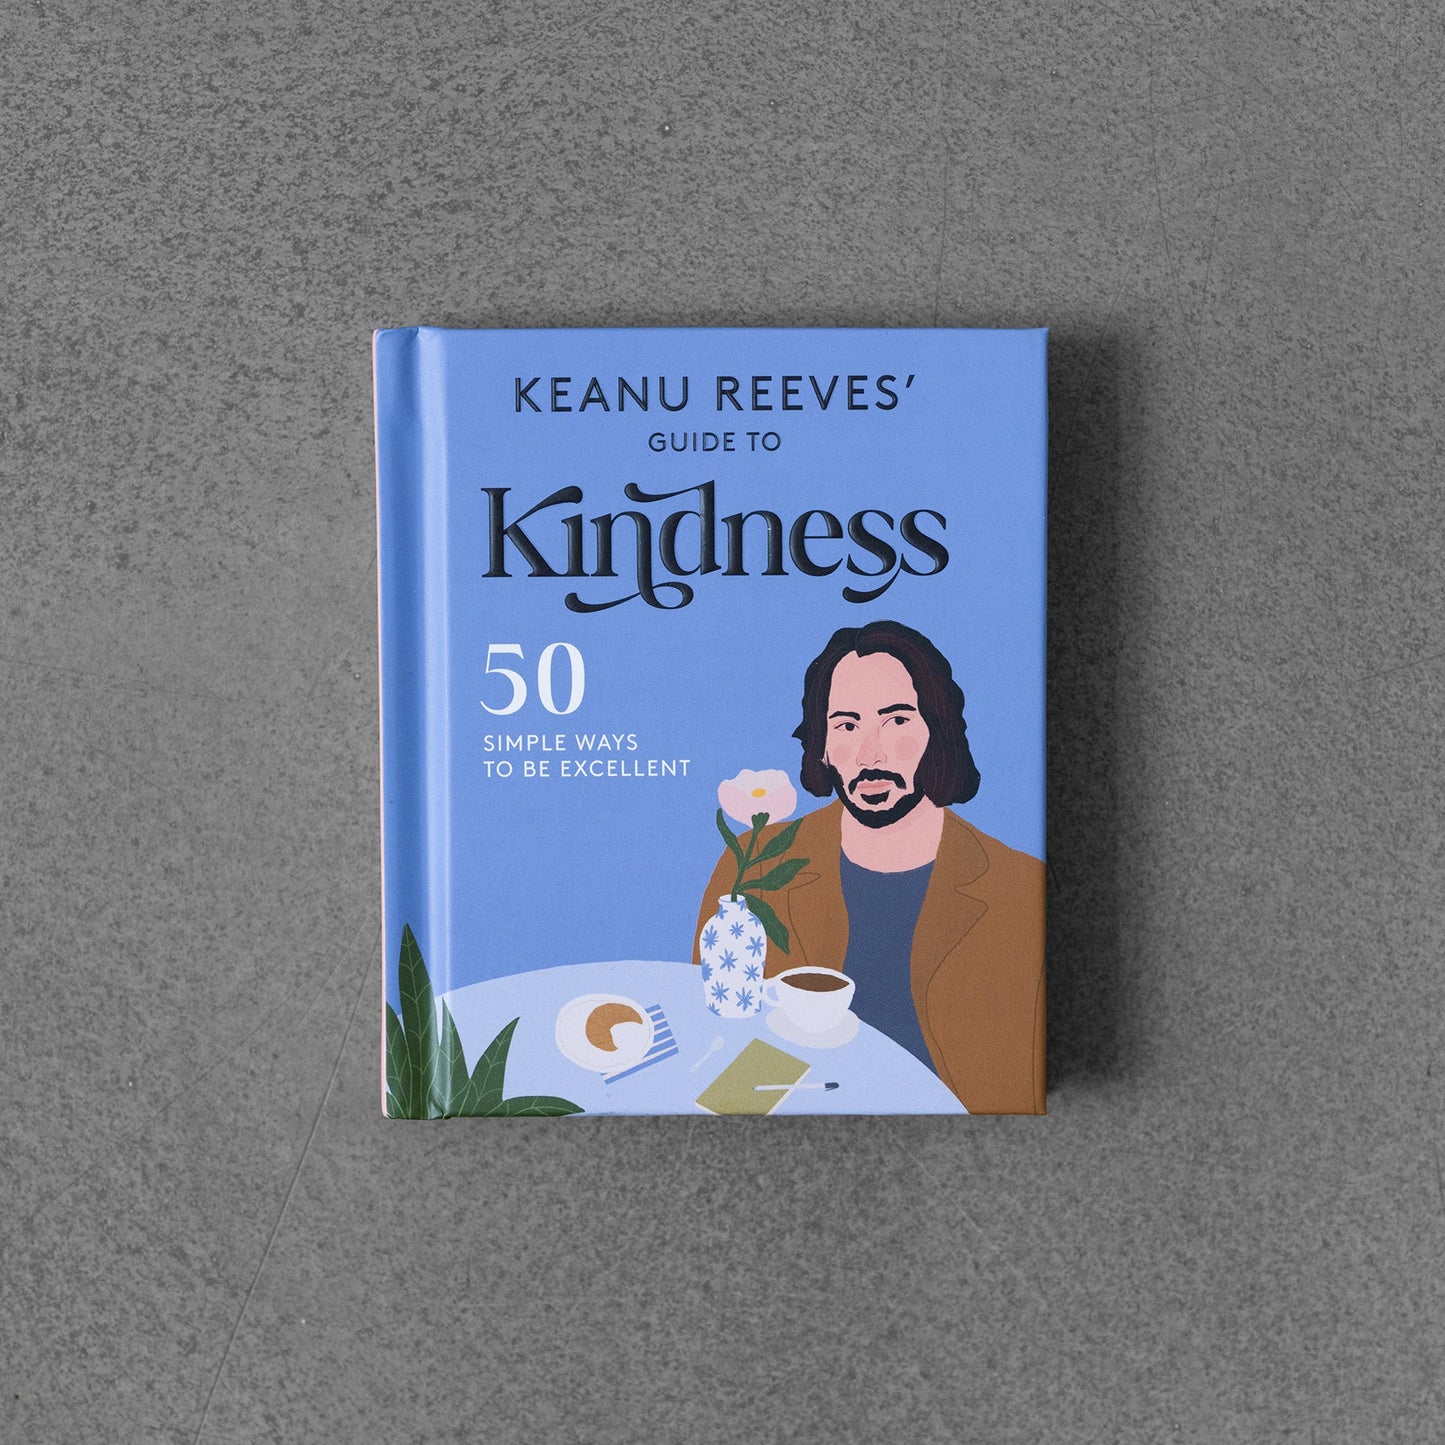 Keanu Reeves’  Guide to Kindness: 50 Simple Ways to Be Excellent